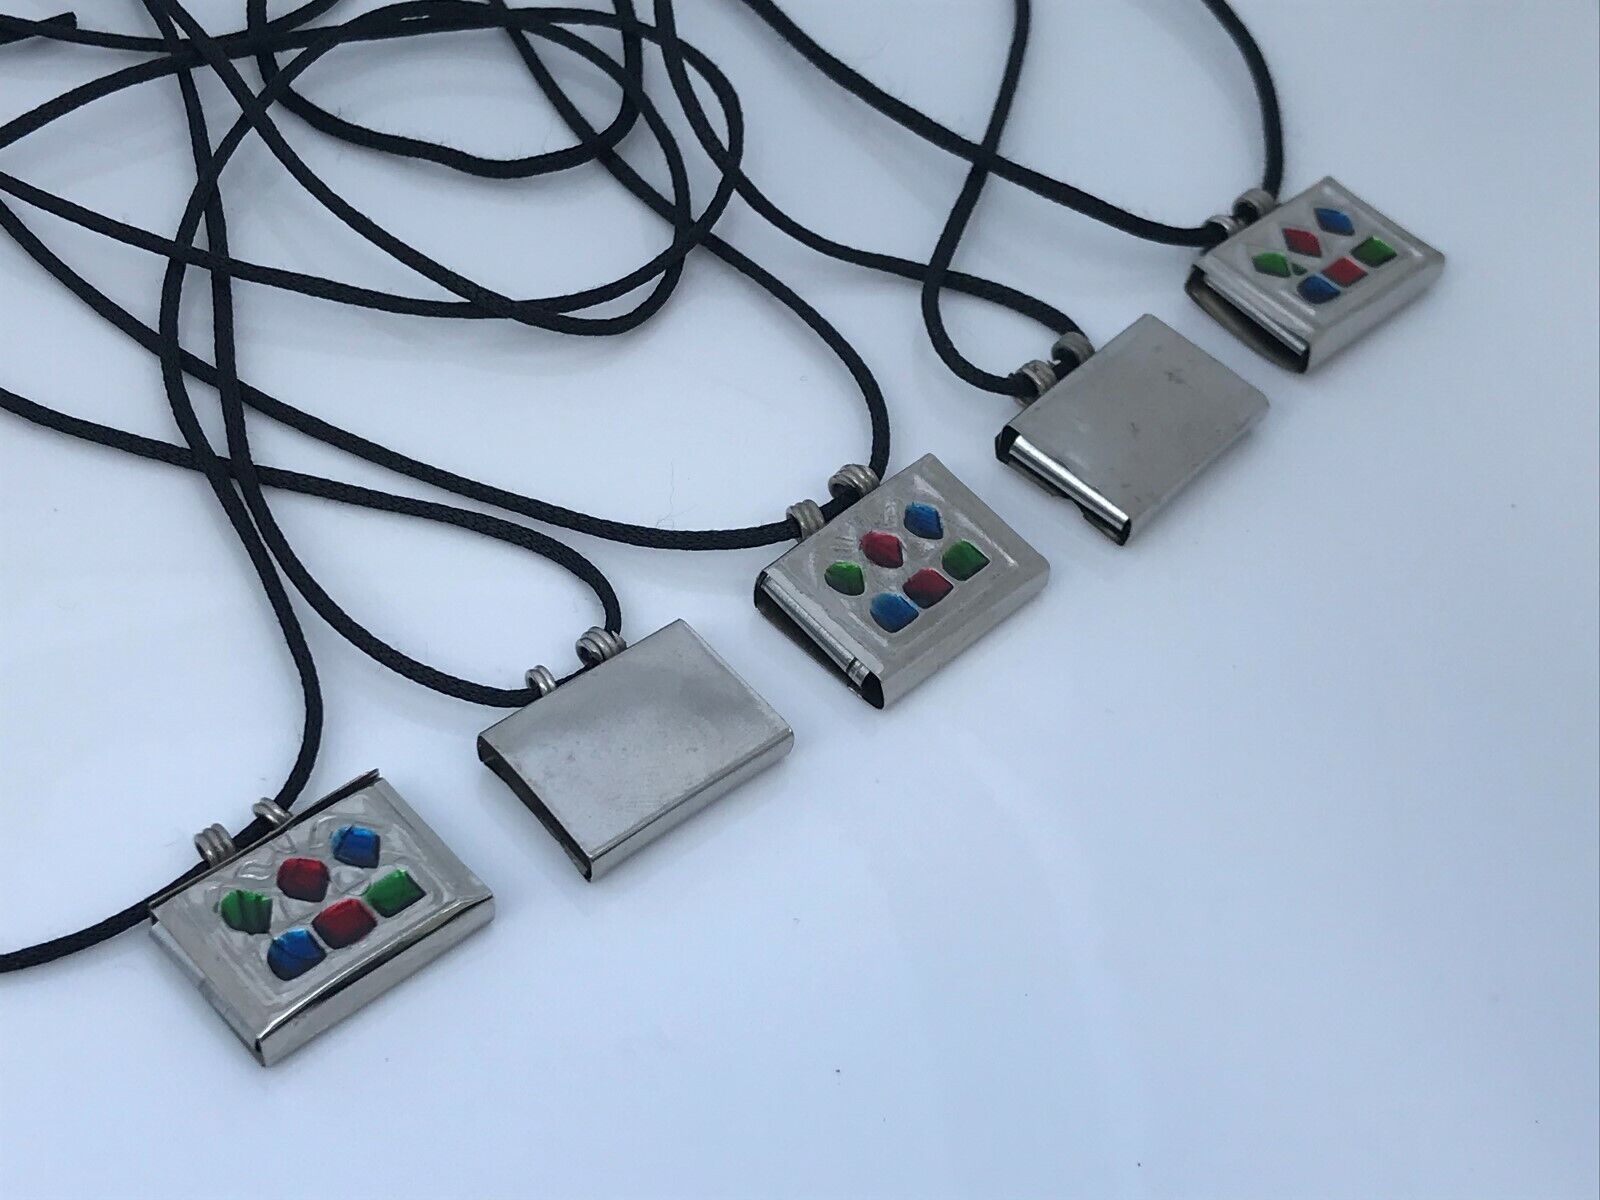 Taweez Lot of 5 Pendant Necklace Silver Tone Religious Amulet Keeper Tabeej Cord Без бренда - фотография #3